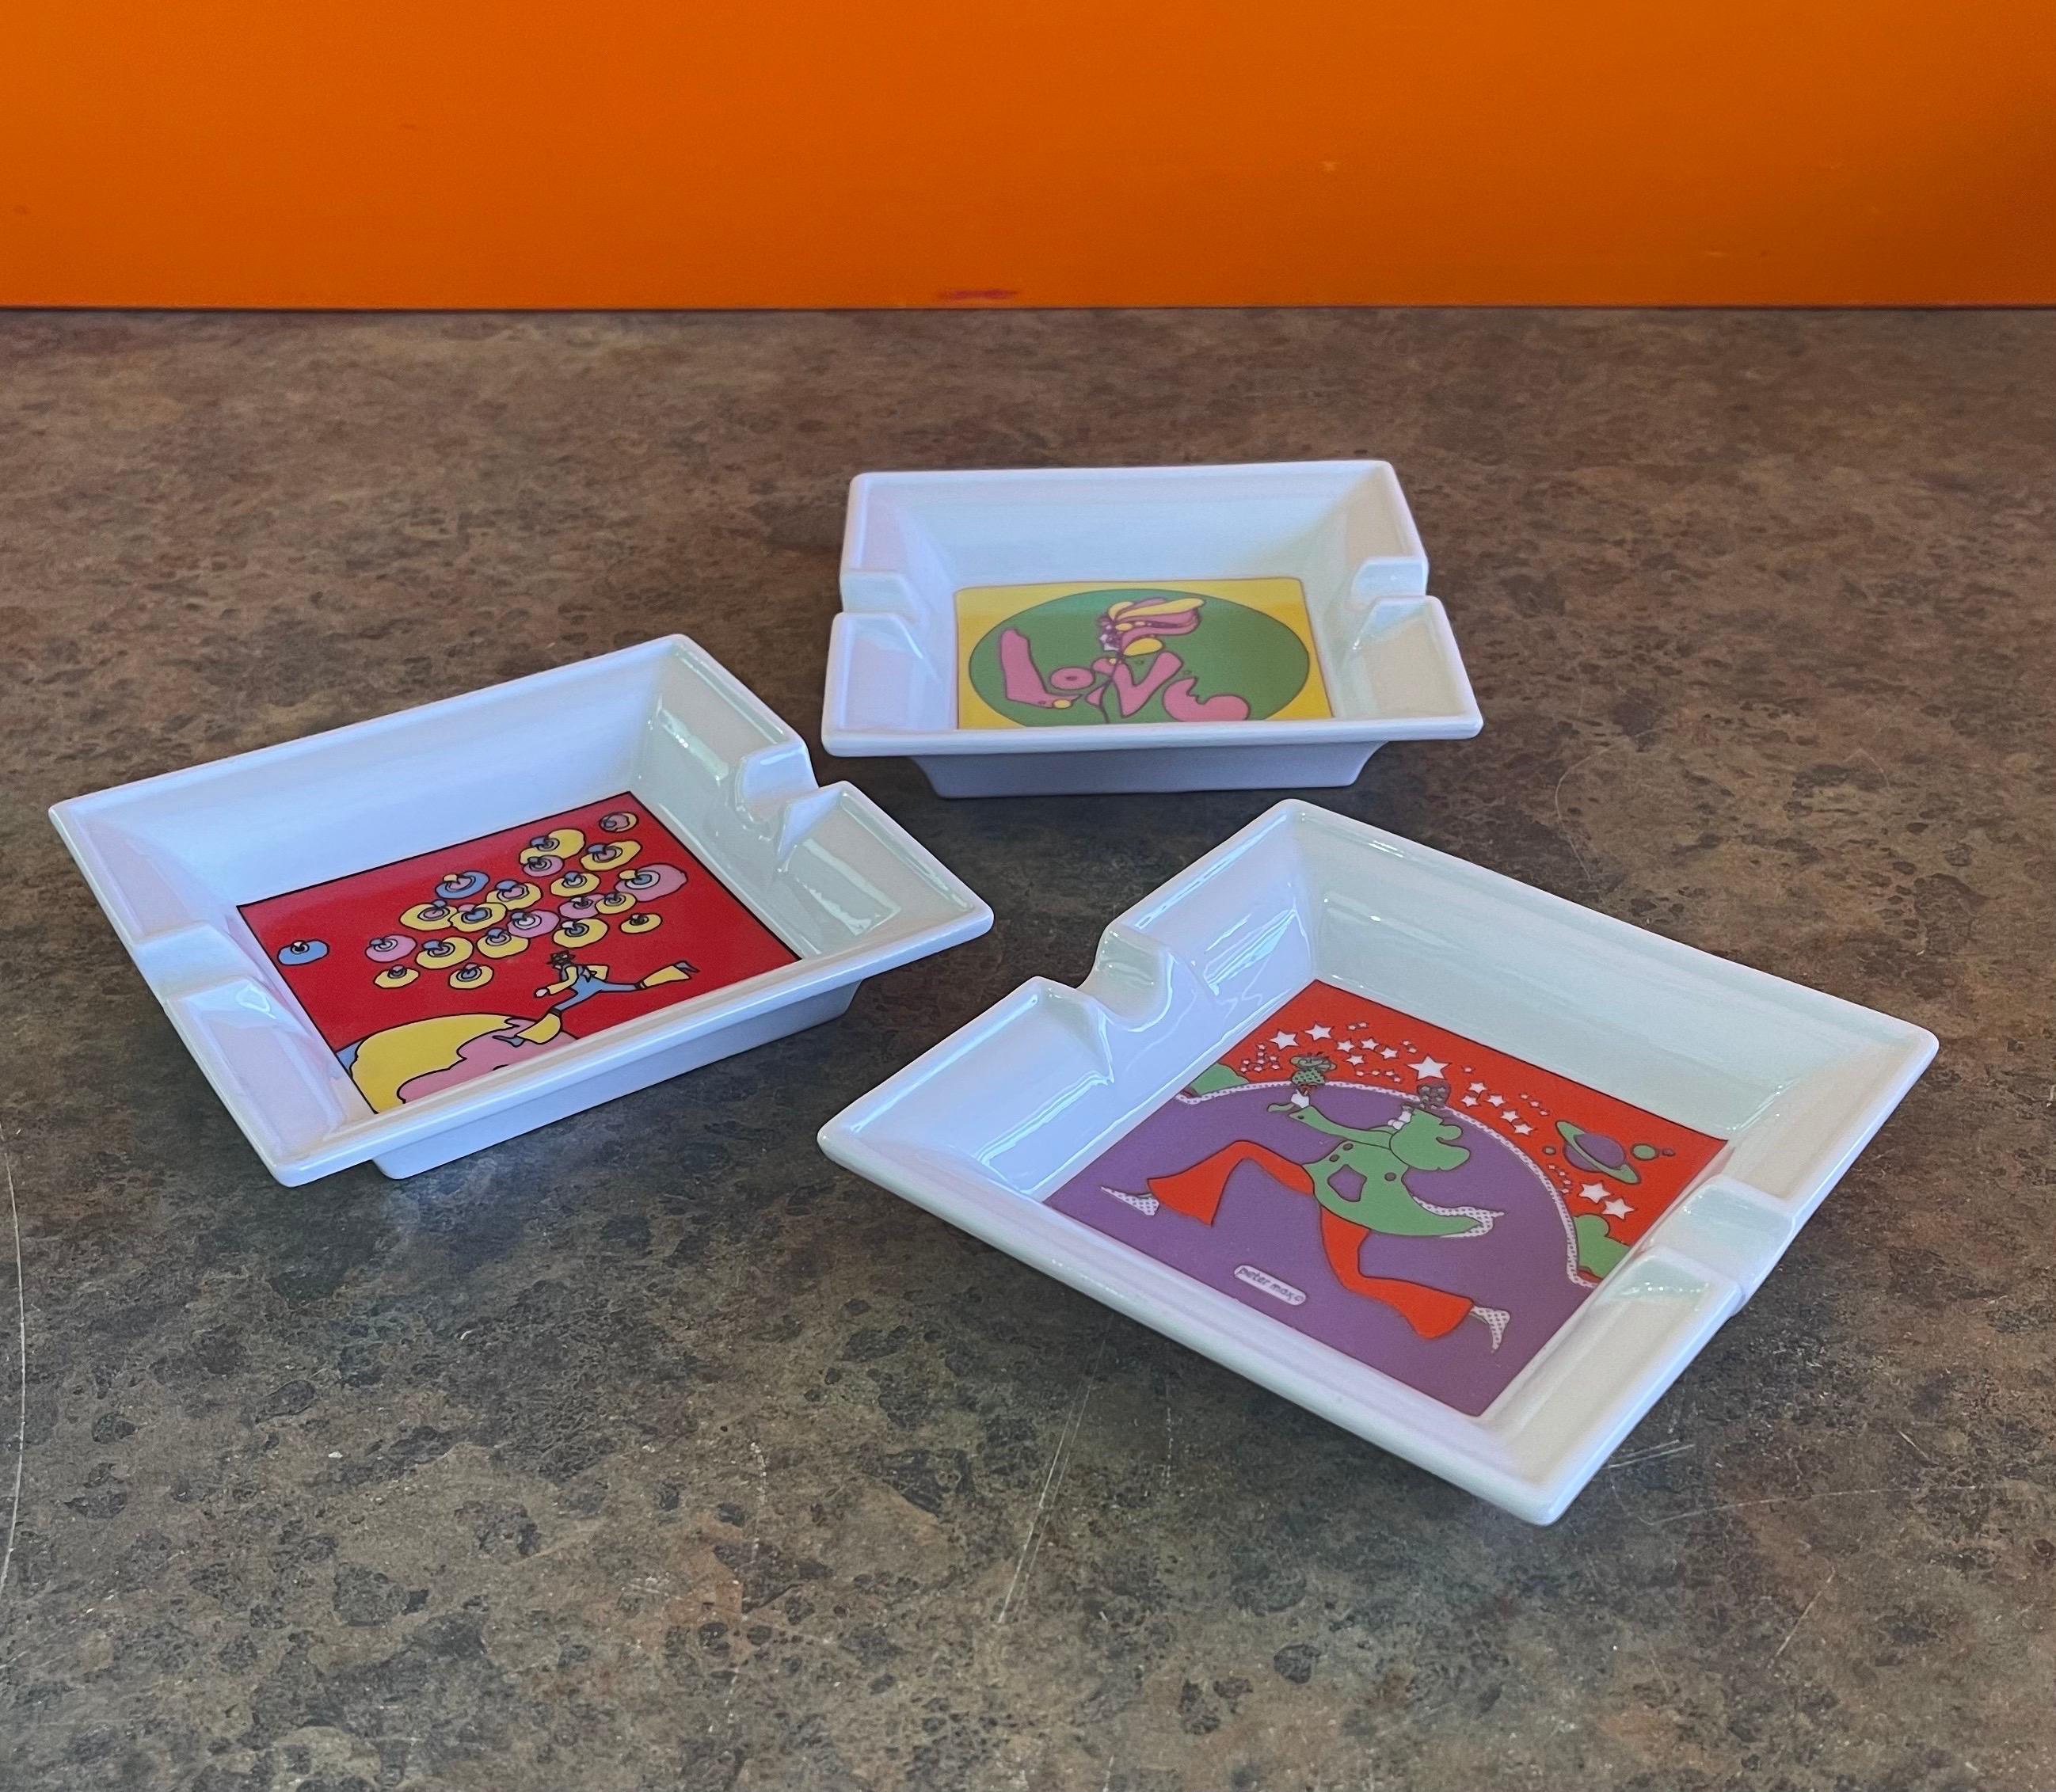 A very cool Peter Max pop art ceramic ashtray by Iroquois of Syracuse, NY, circa 1980s. There are three different ashtrays available; all are in excellent vintage condition with no chips or cracks and they measure 5.25